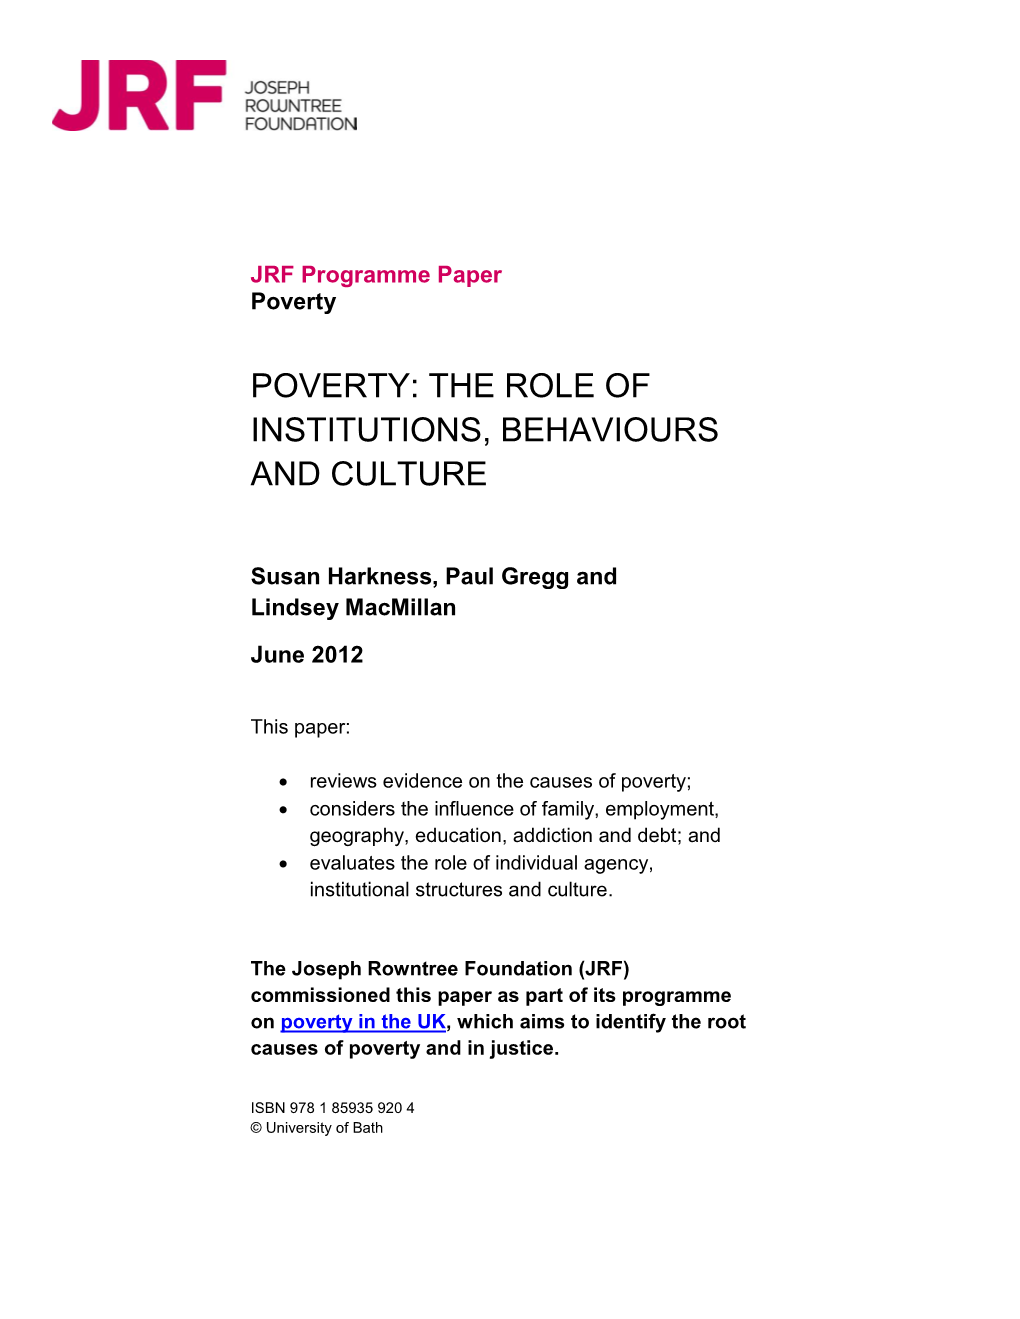 Poverty: the Role of Institutions, Behaviours and Culture